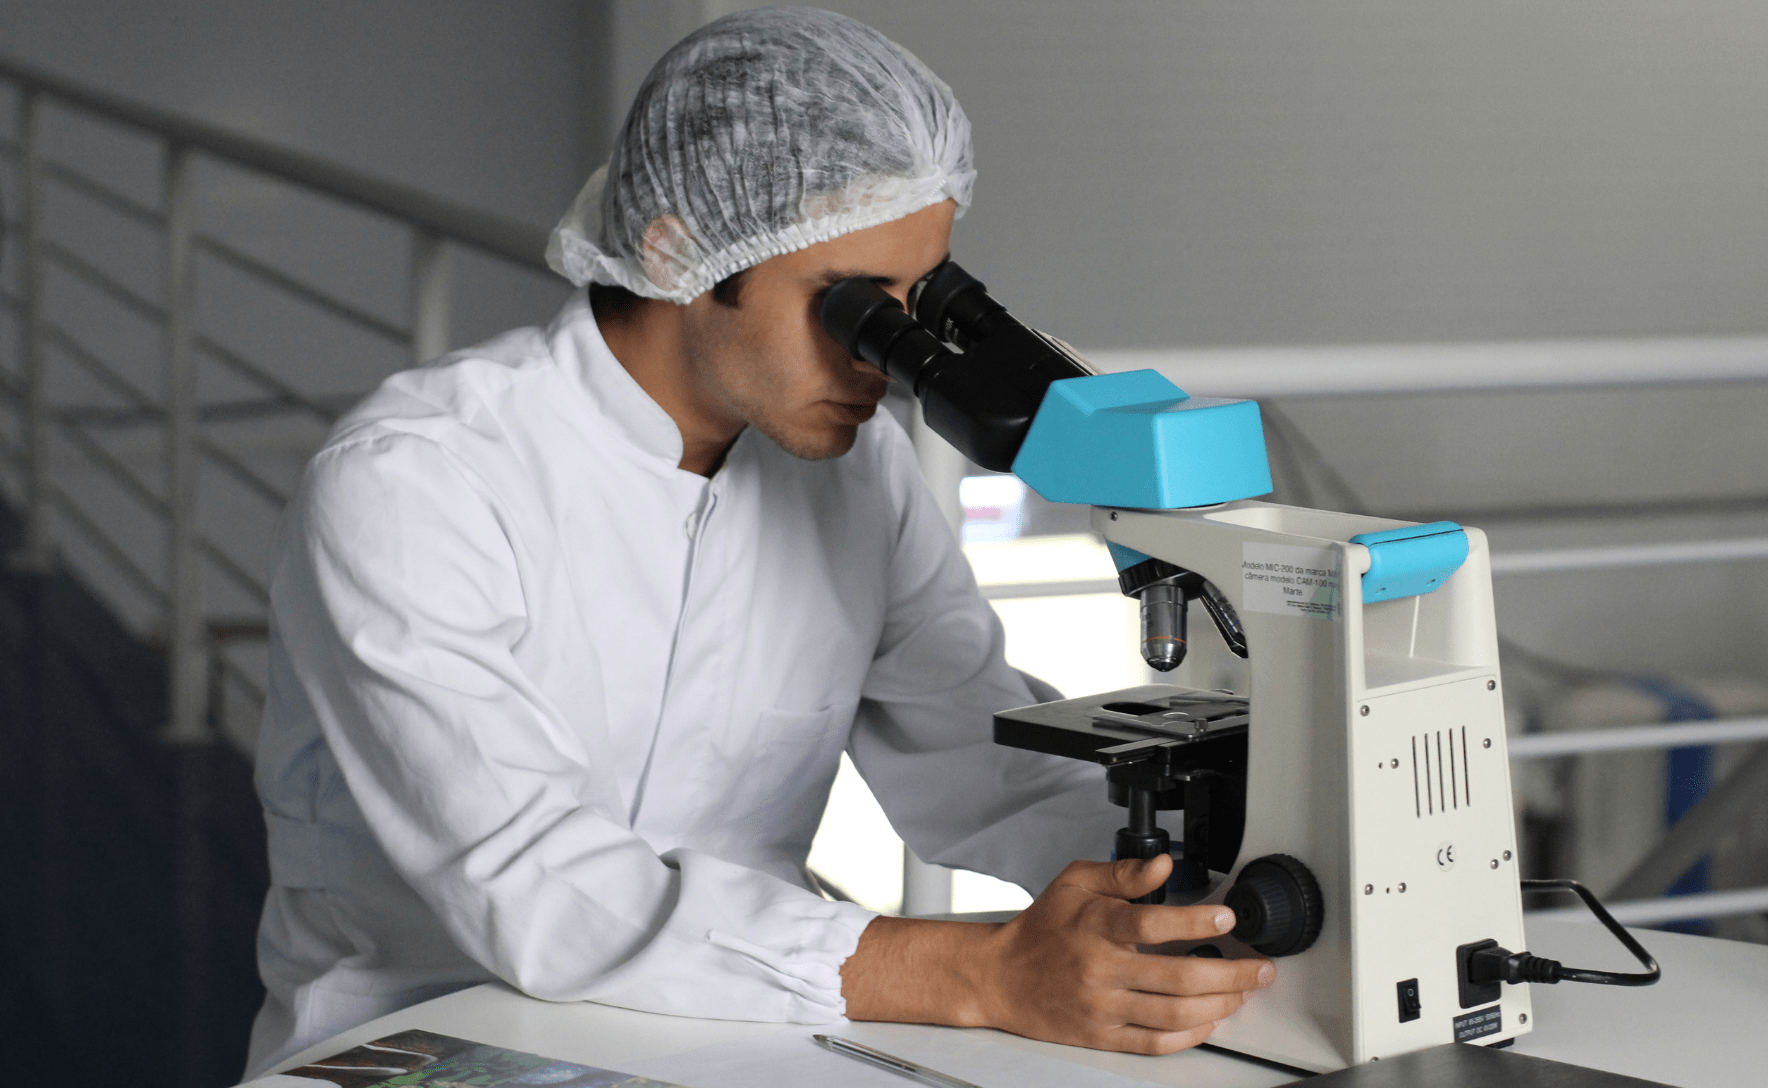 A man in a white lab coat is peering through a microscope.